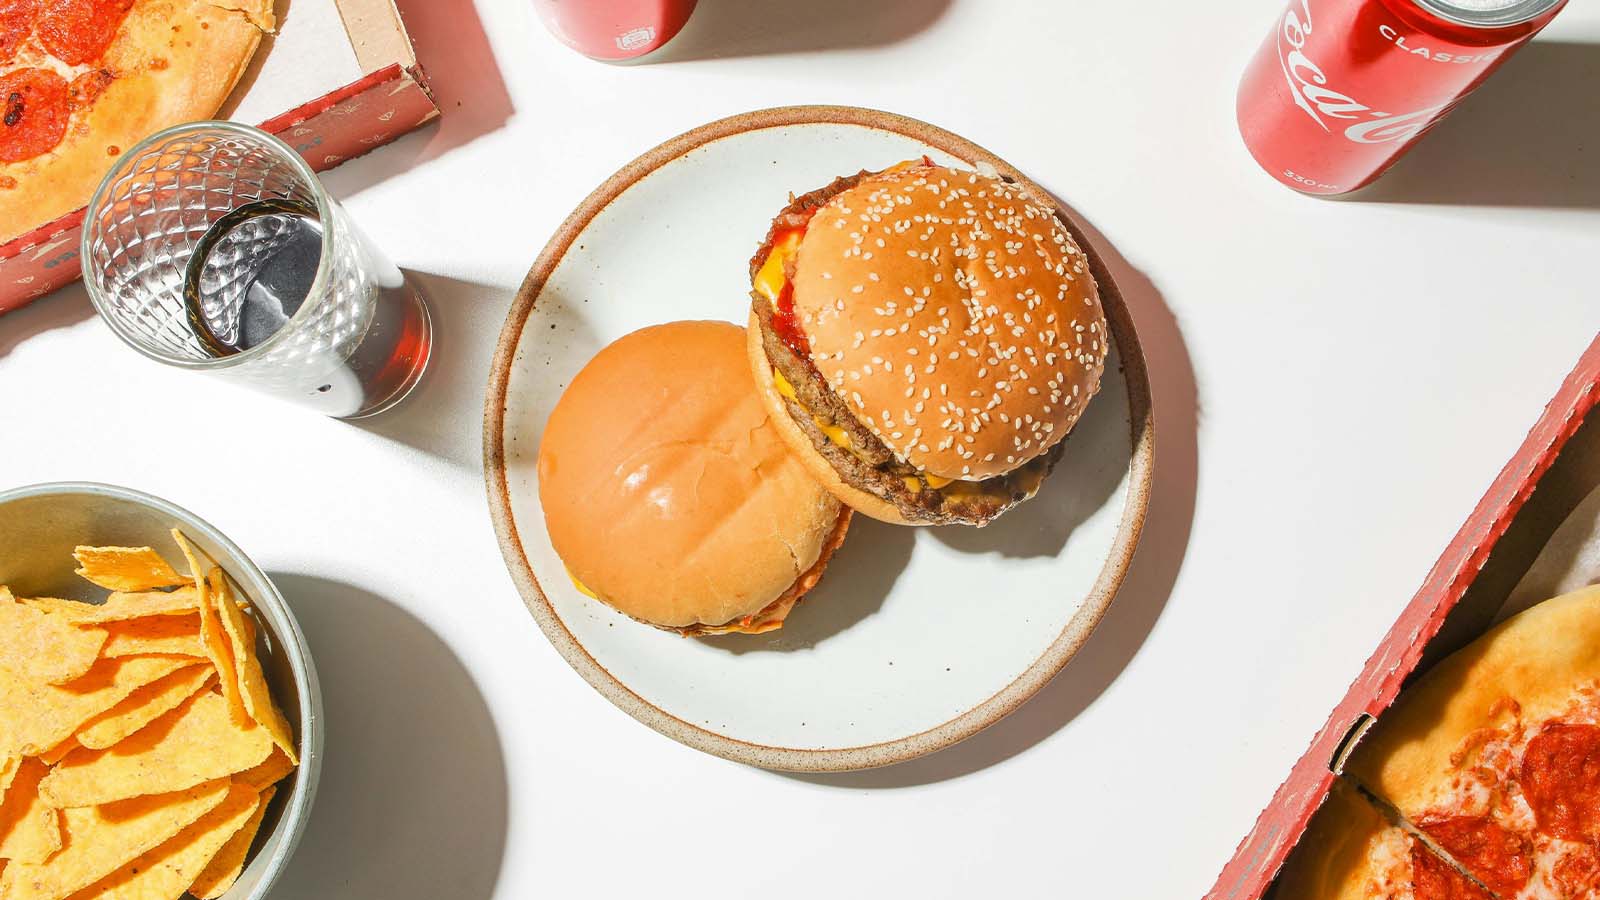 Two cheese burgers are stacked on a plate on a table, surrounded by cans of Coca Cola, a bowl of corn chips and pizzas